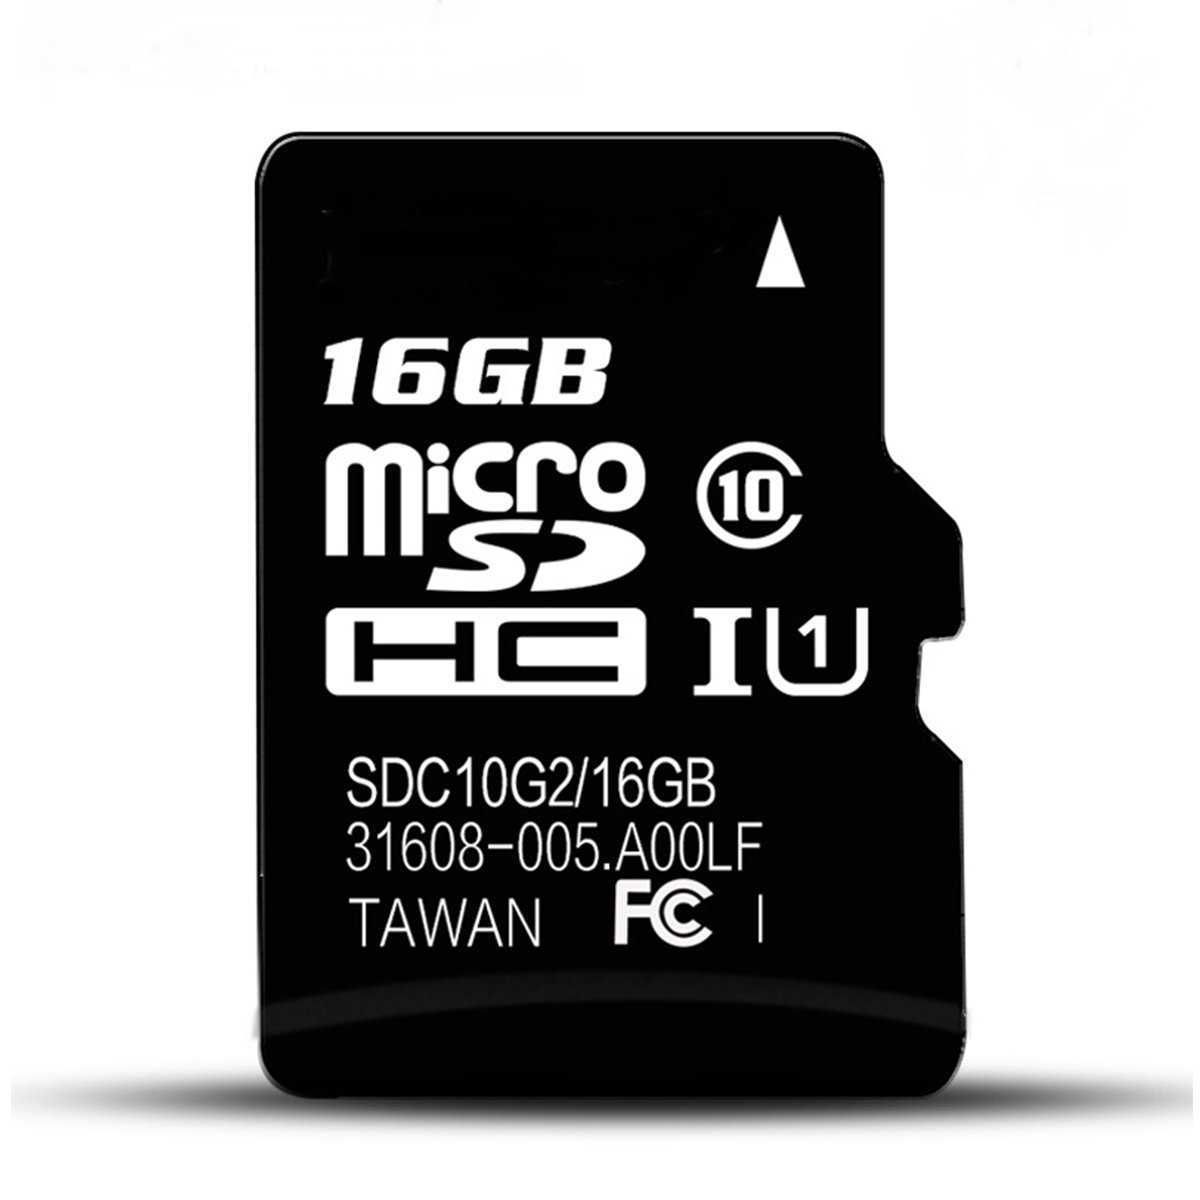 Only 16GB Memory Card